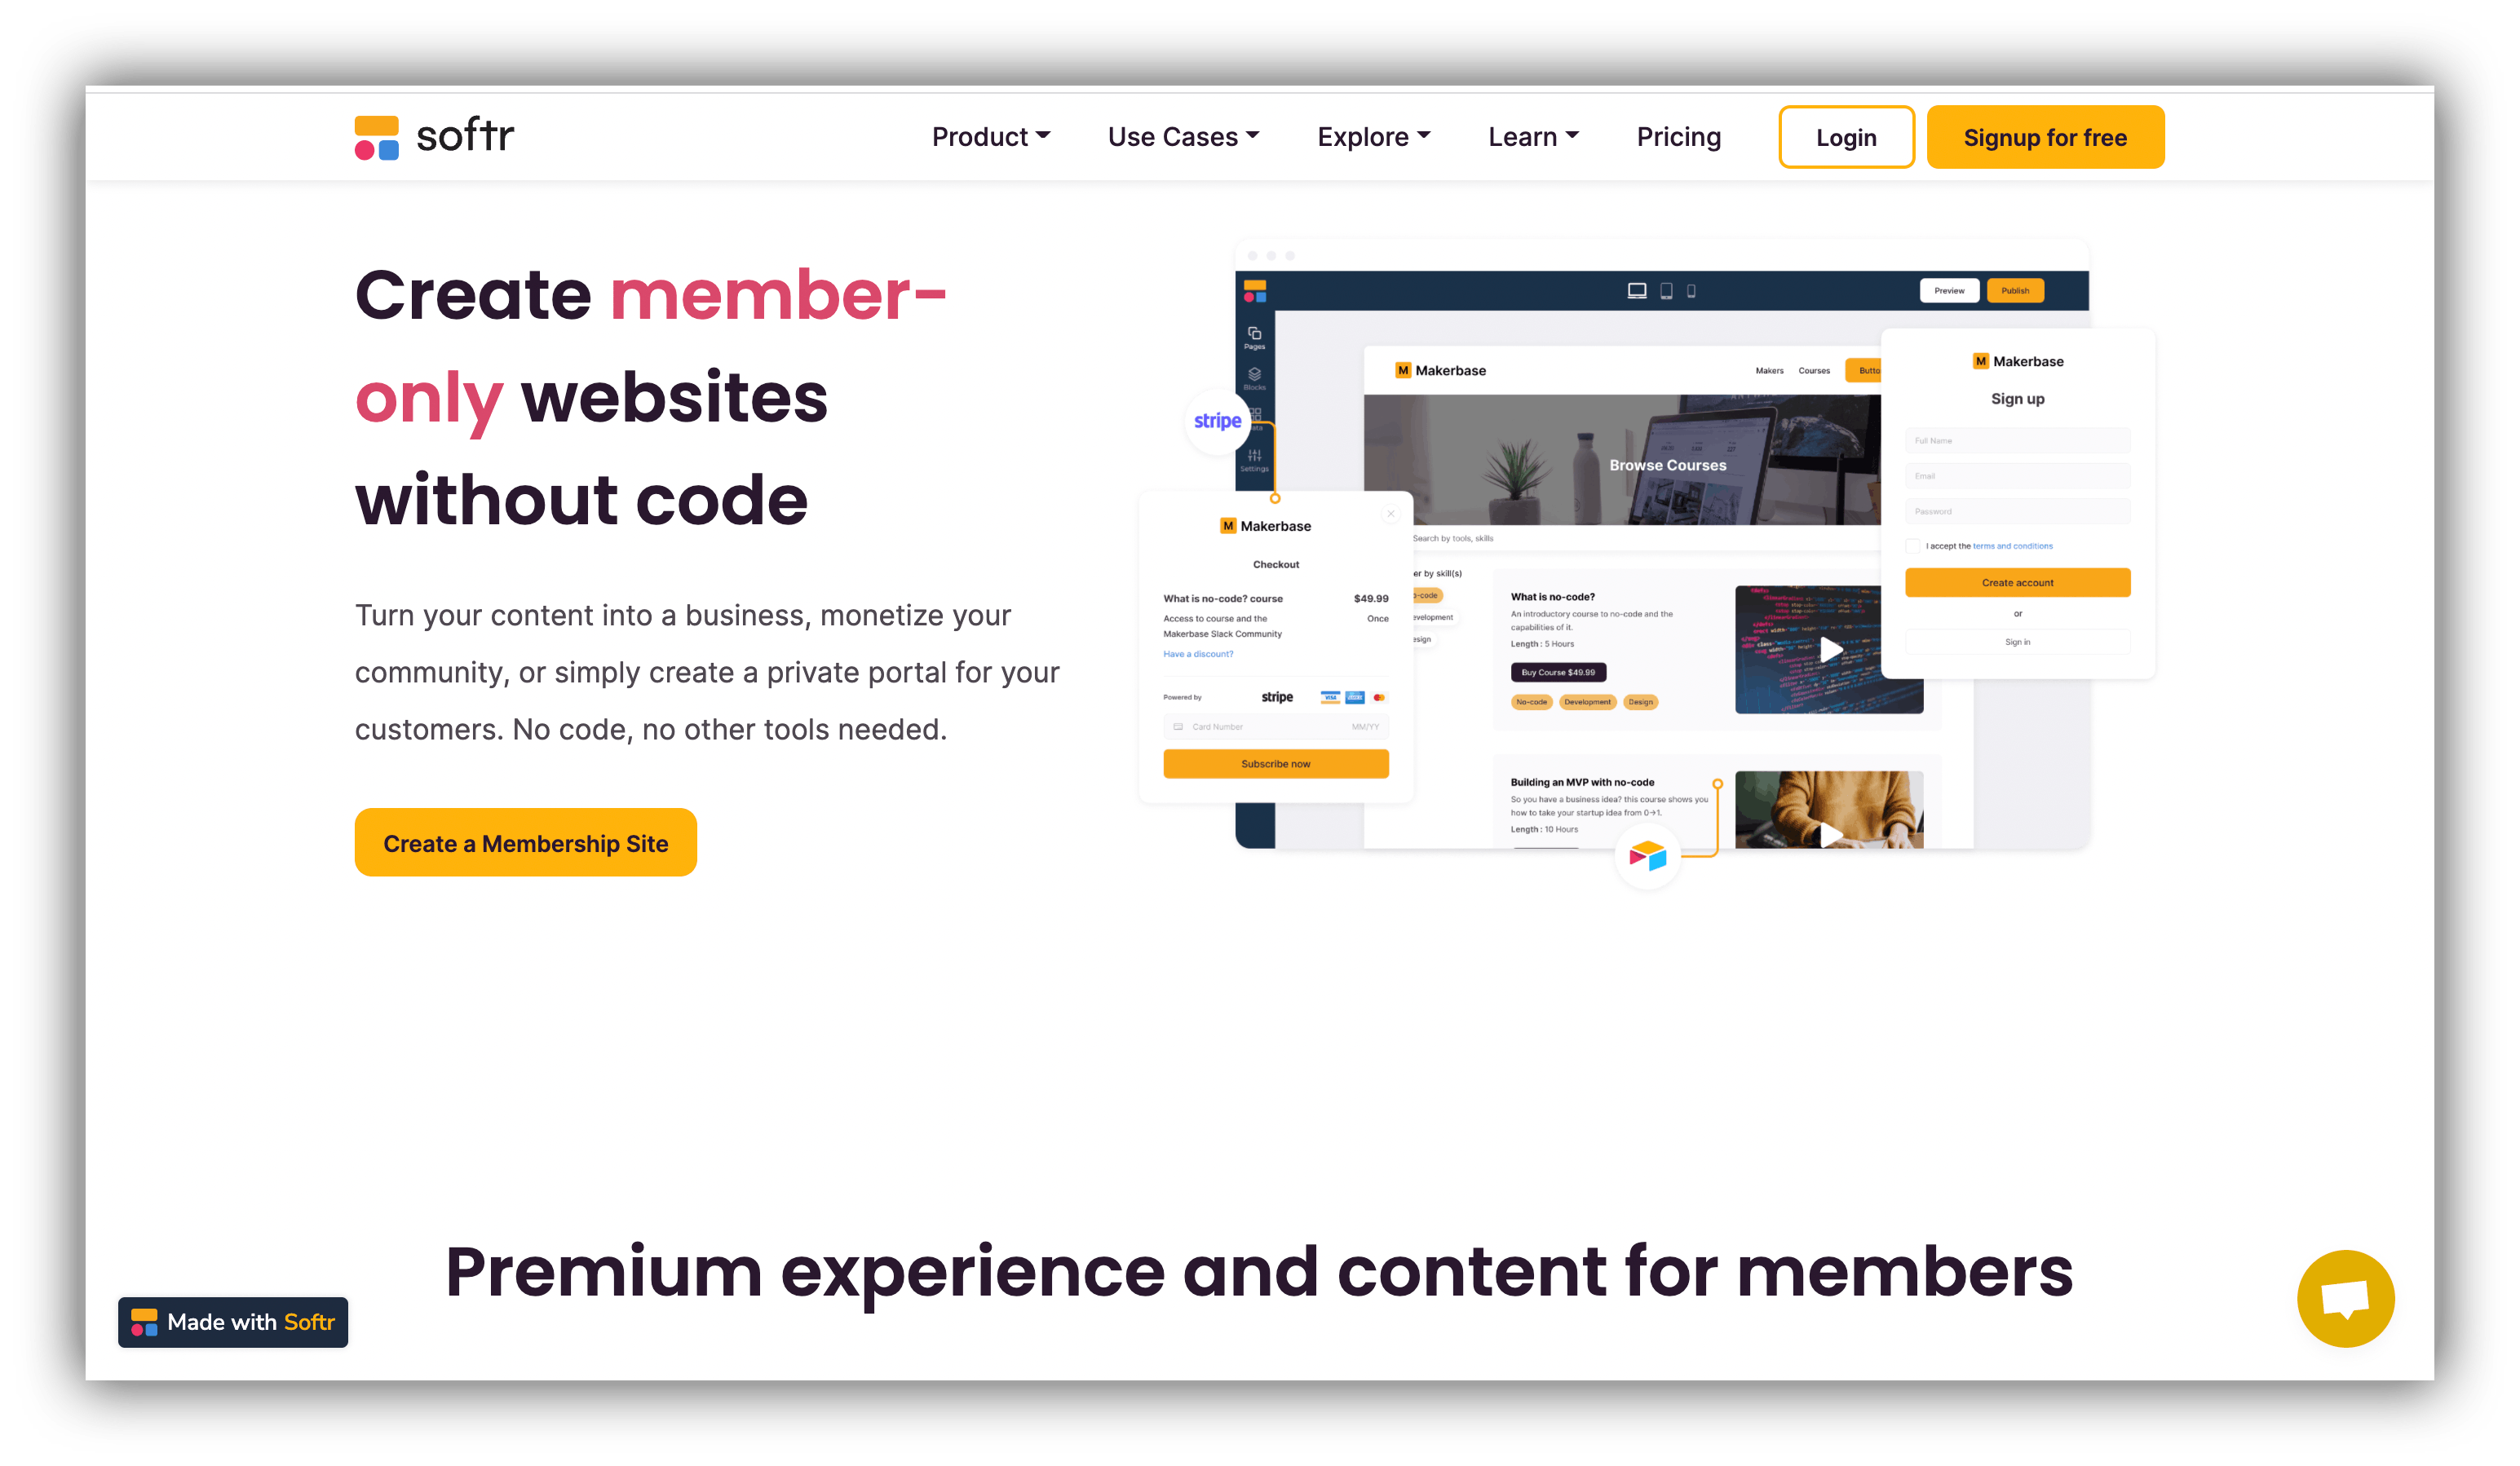 one of the Softr's landing pages